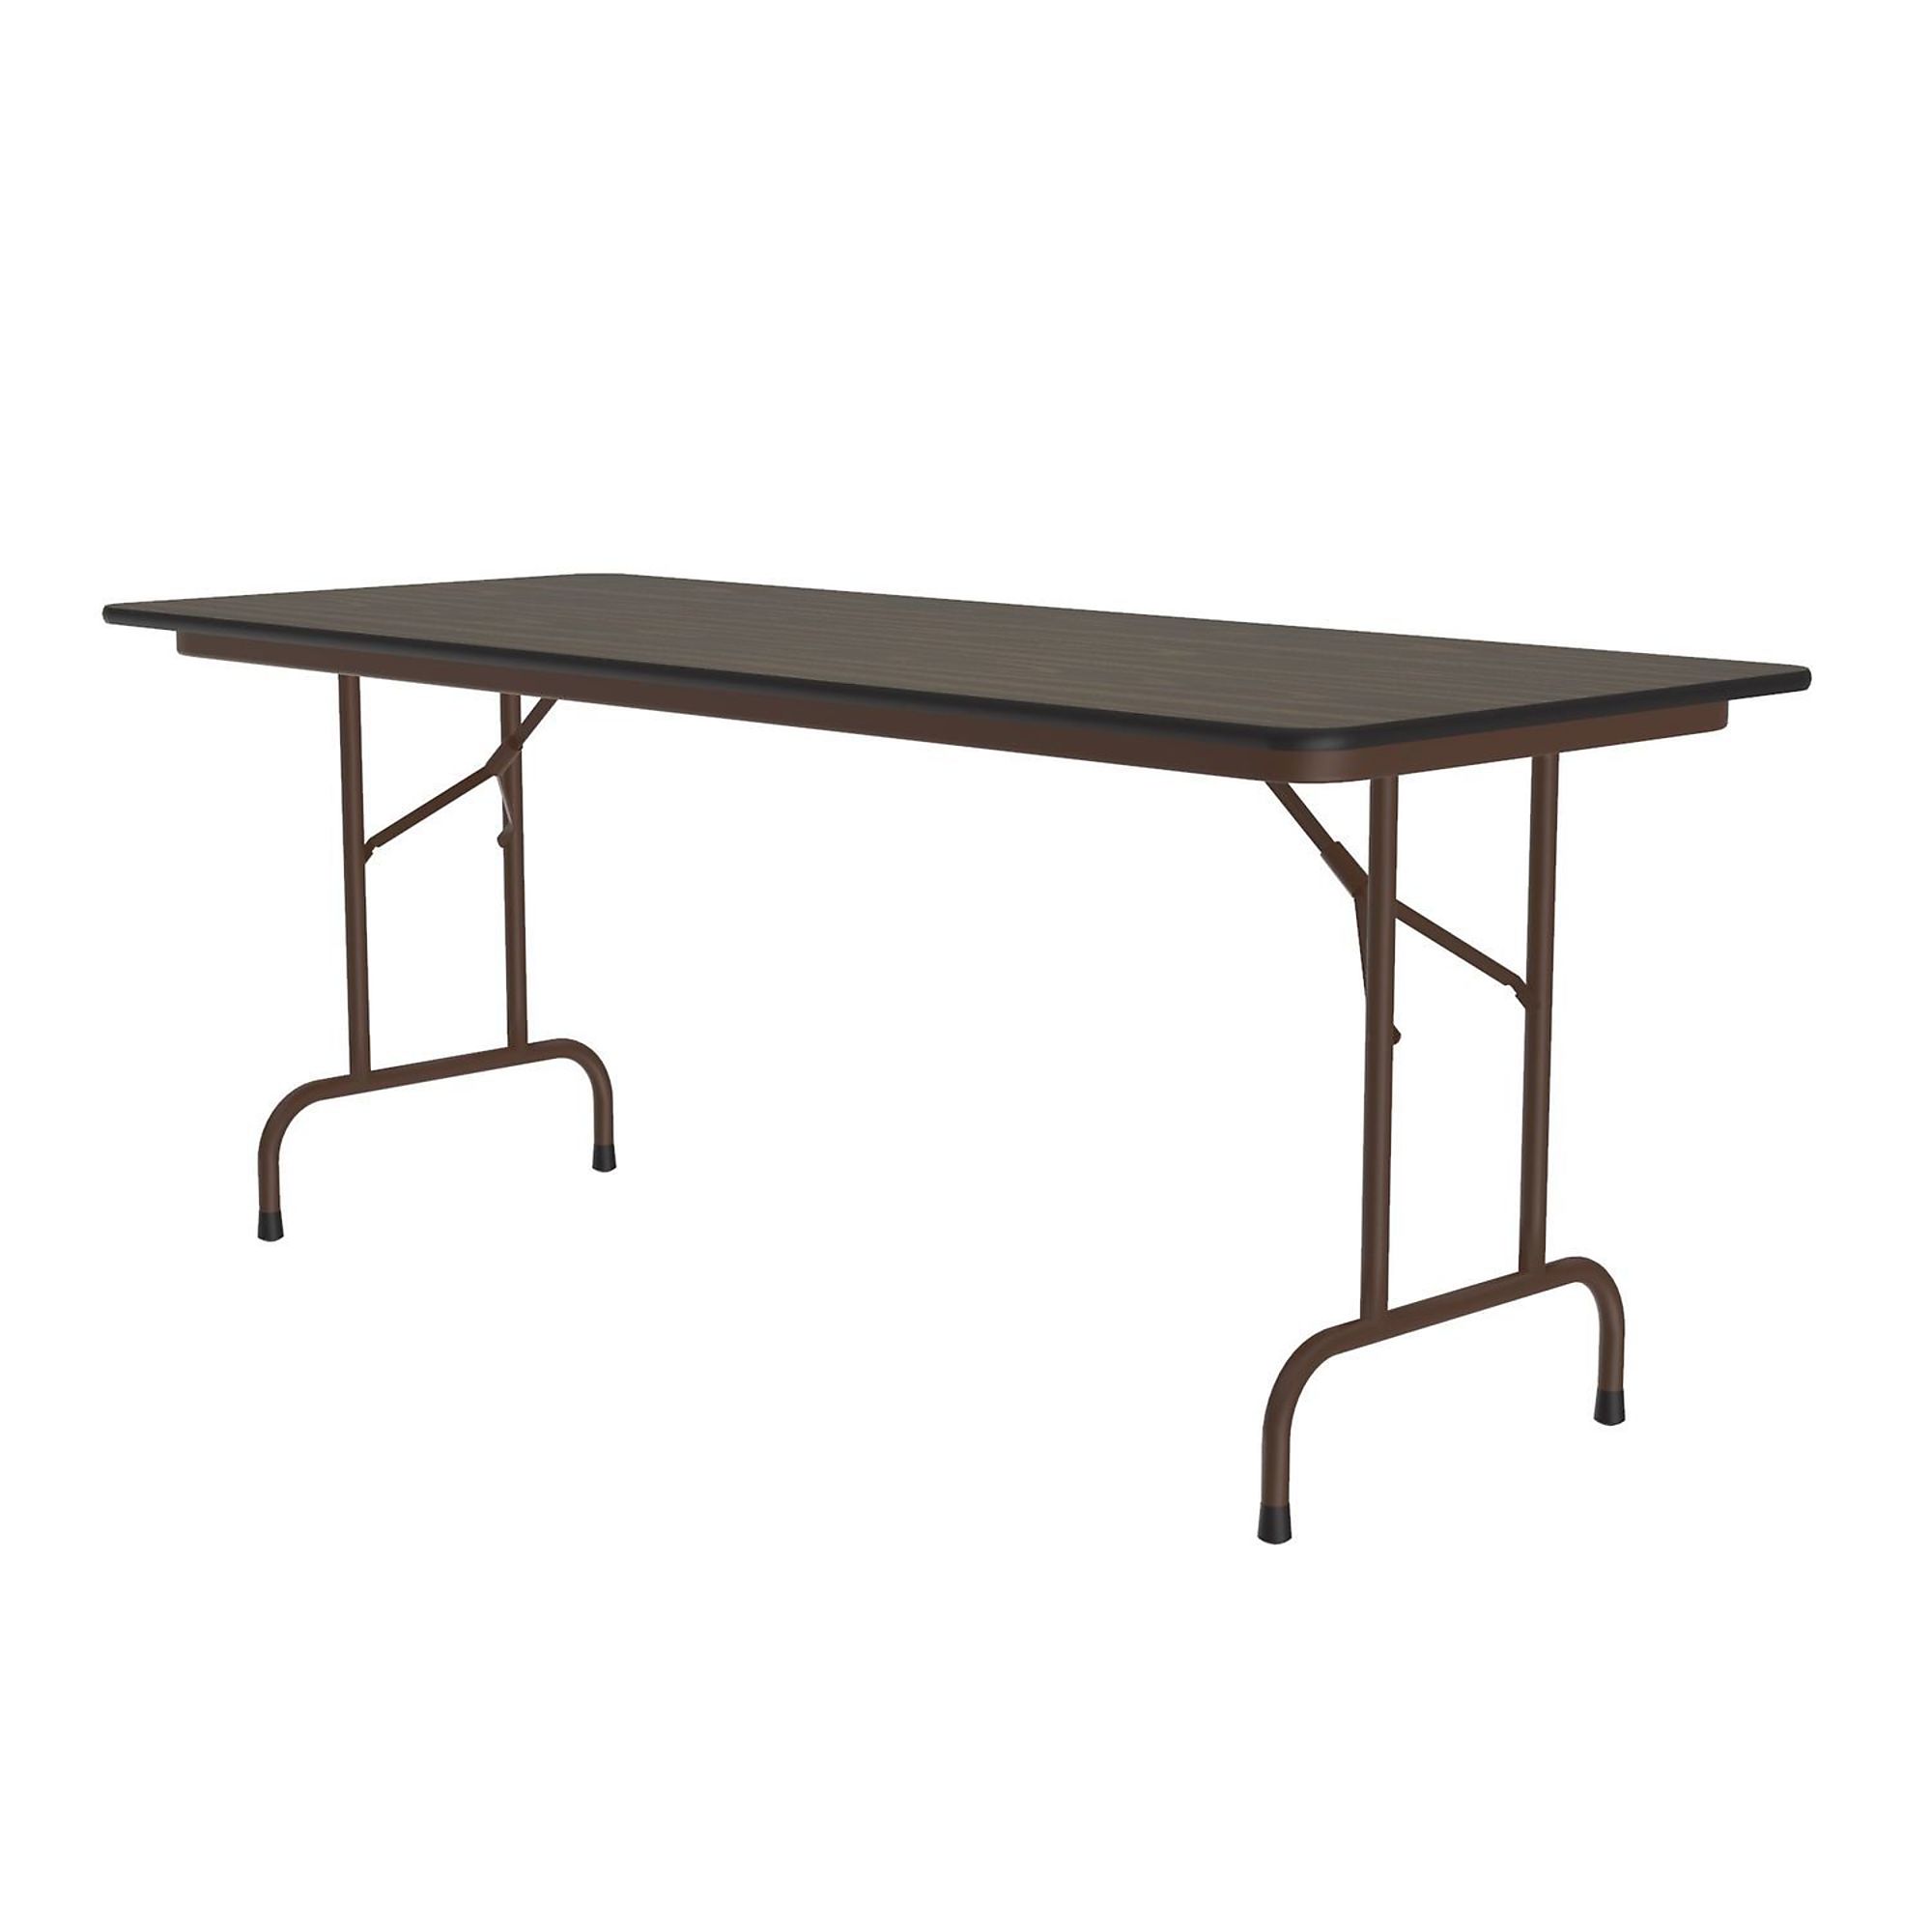 Correll, Commercial TFL Folding Table, Walnut, 30x72, Height 29 in, Width 30 in, Length 72 in, Model CF3072TF-01